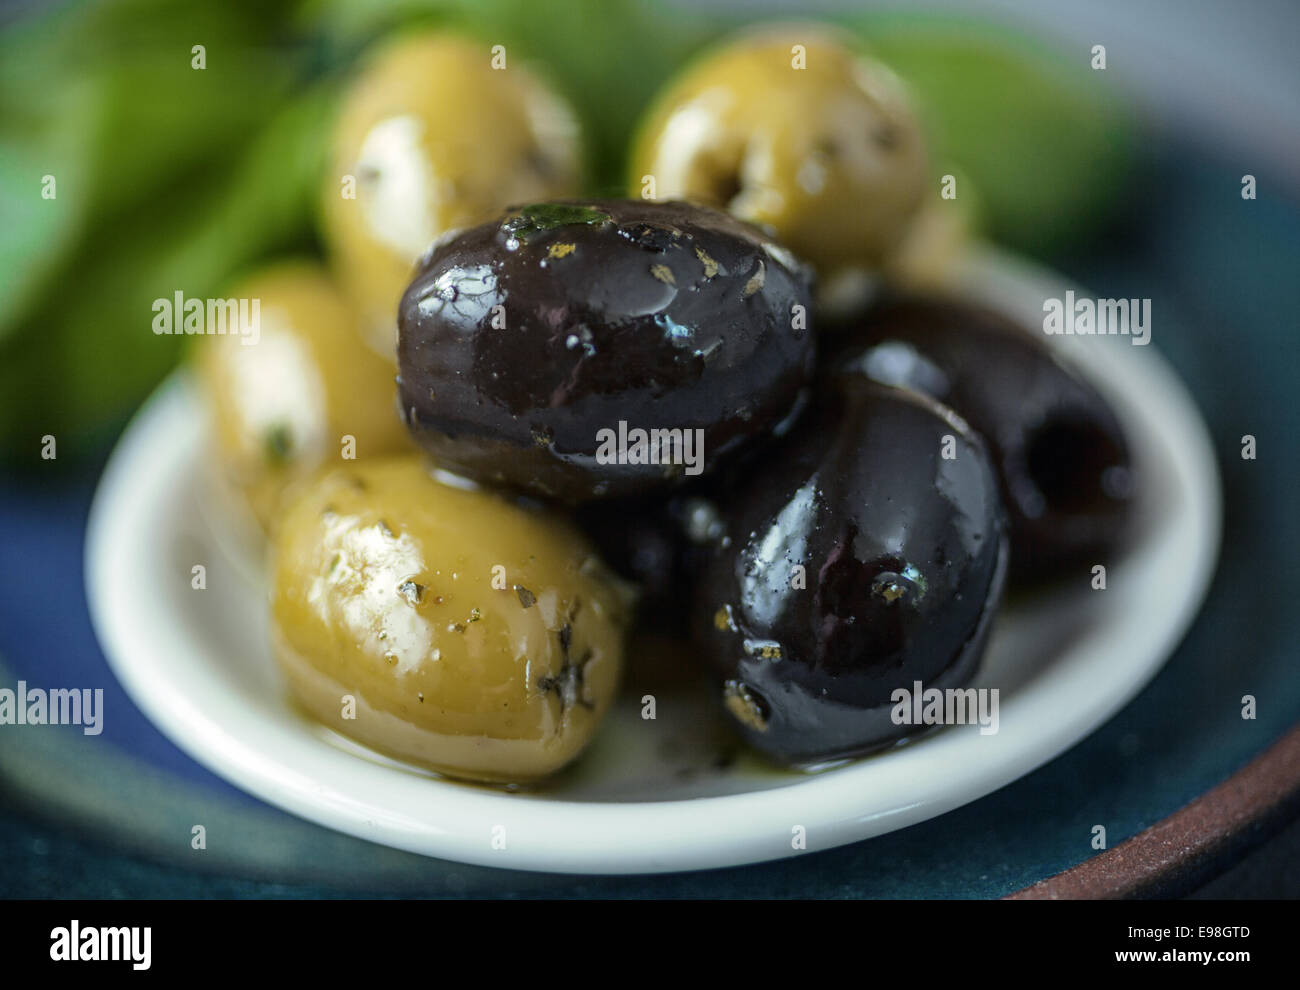 Small bowl of cured fresh black and green olives served as snacks and appetizers with shallow dof Stock Photo